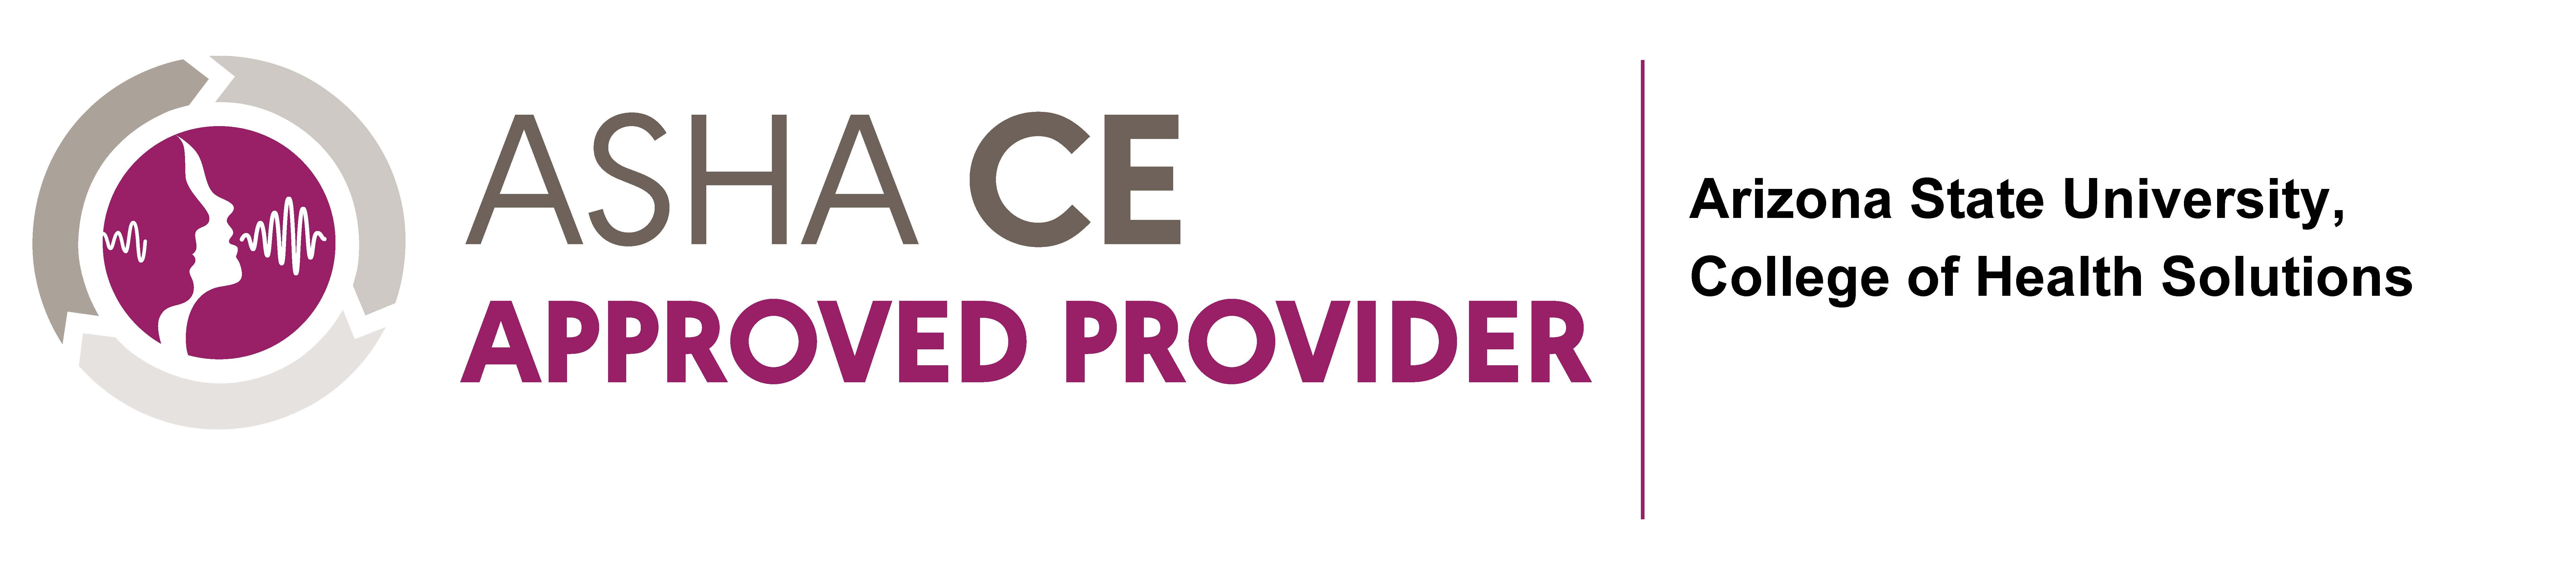 ASHA CE Approved Provider: Arizona State University, College of Health Solutions